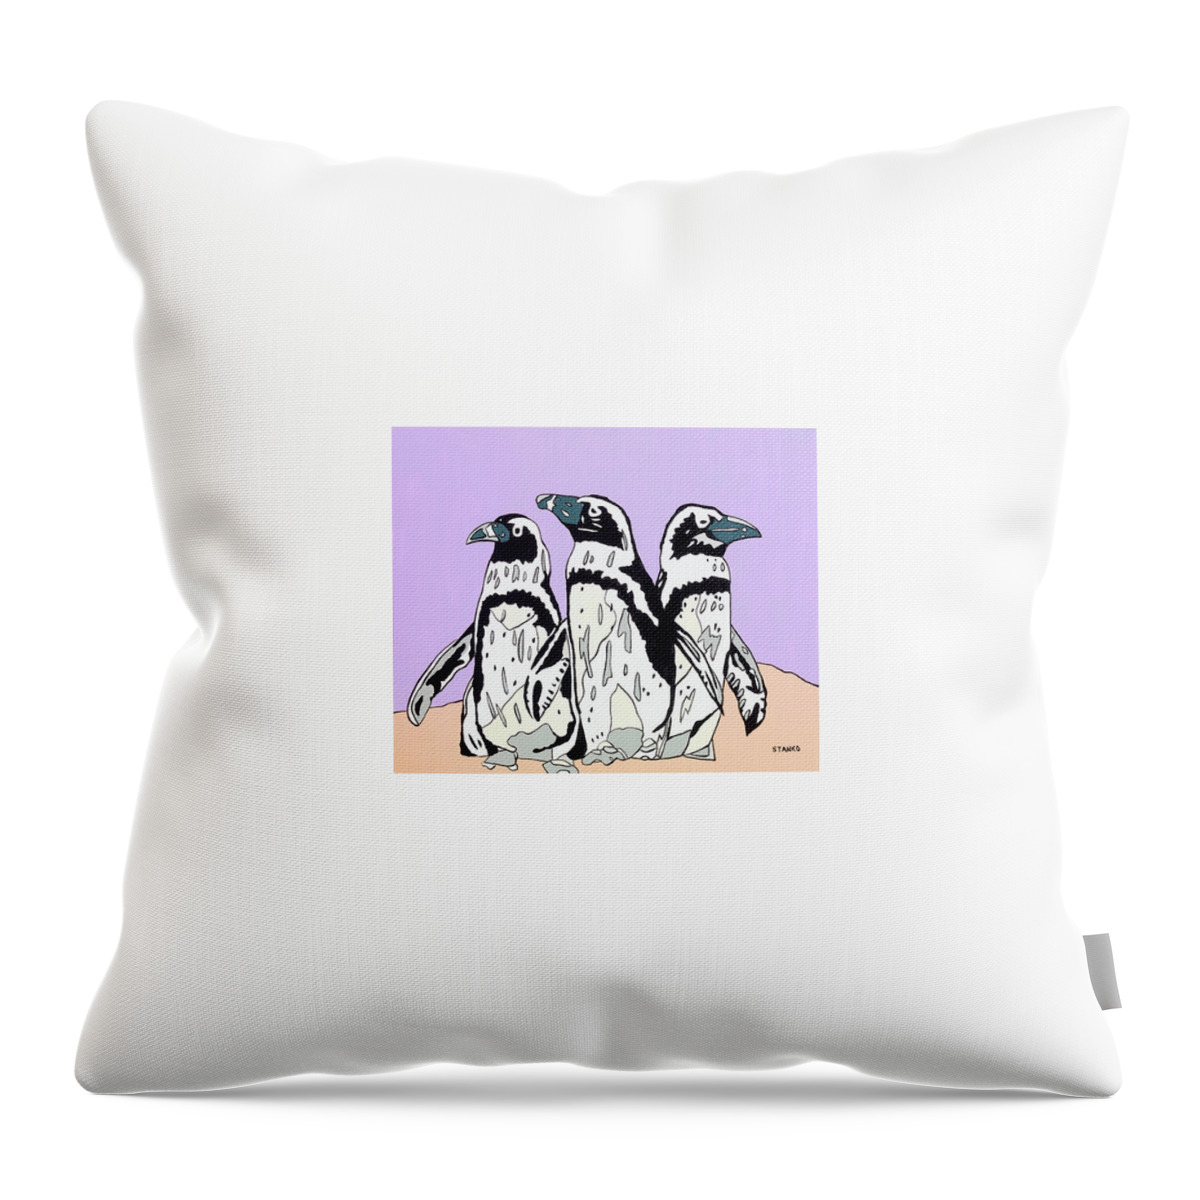 Penguins Birds Throw Pillow featuring the painting Penguins by Mike Stanko